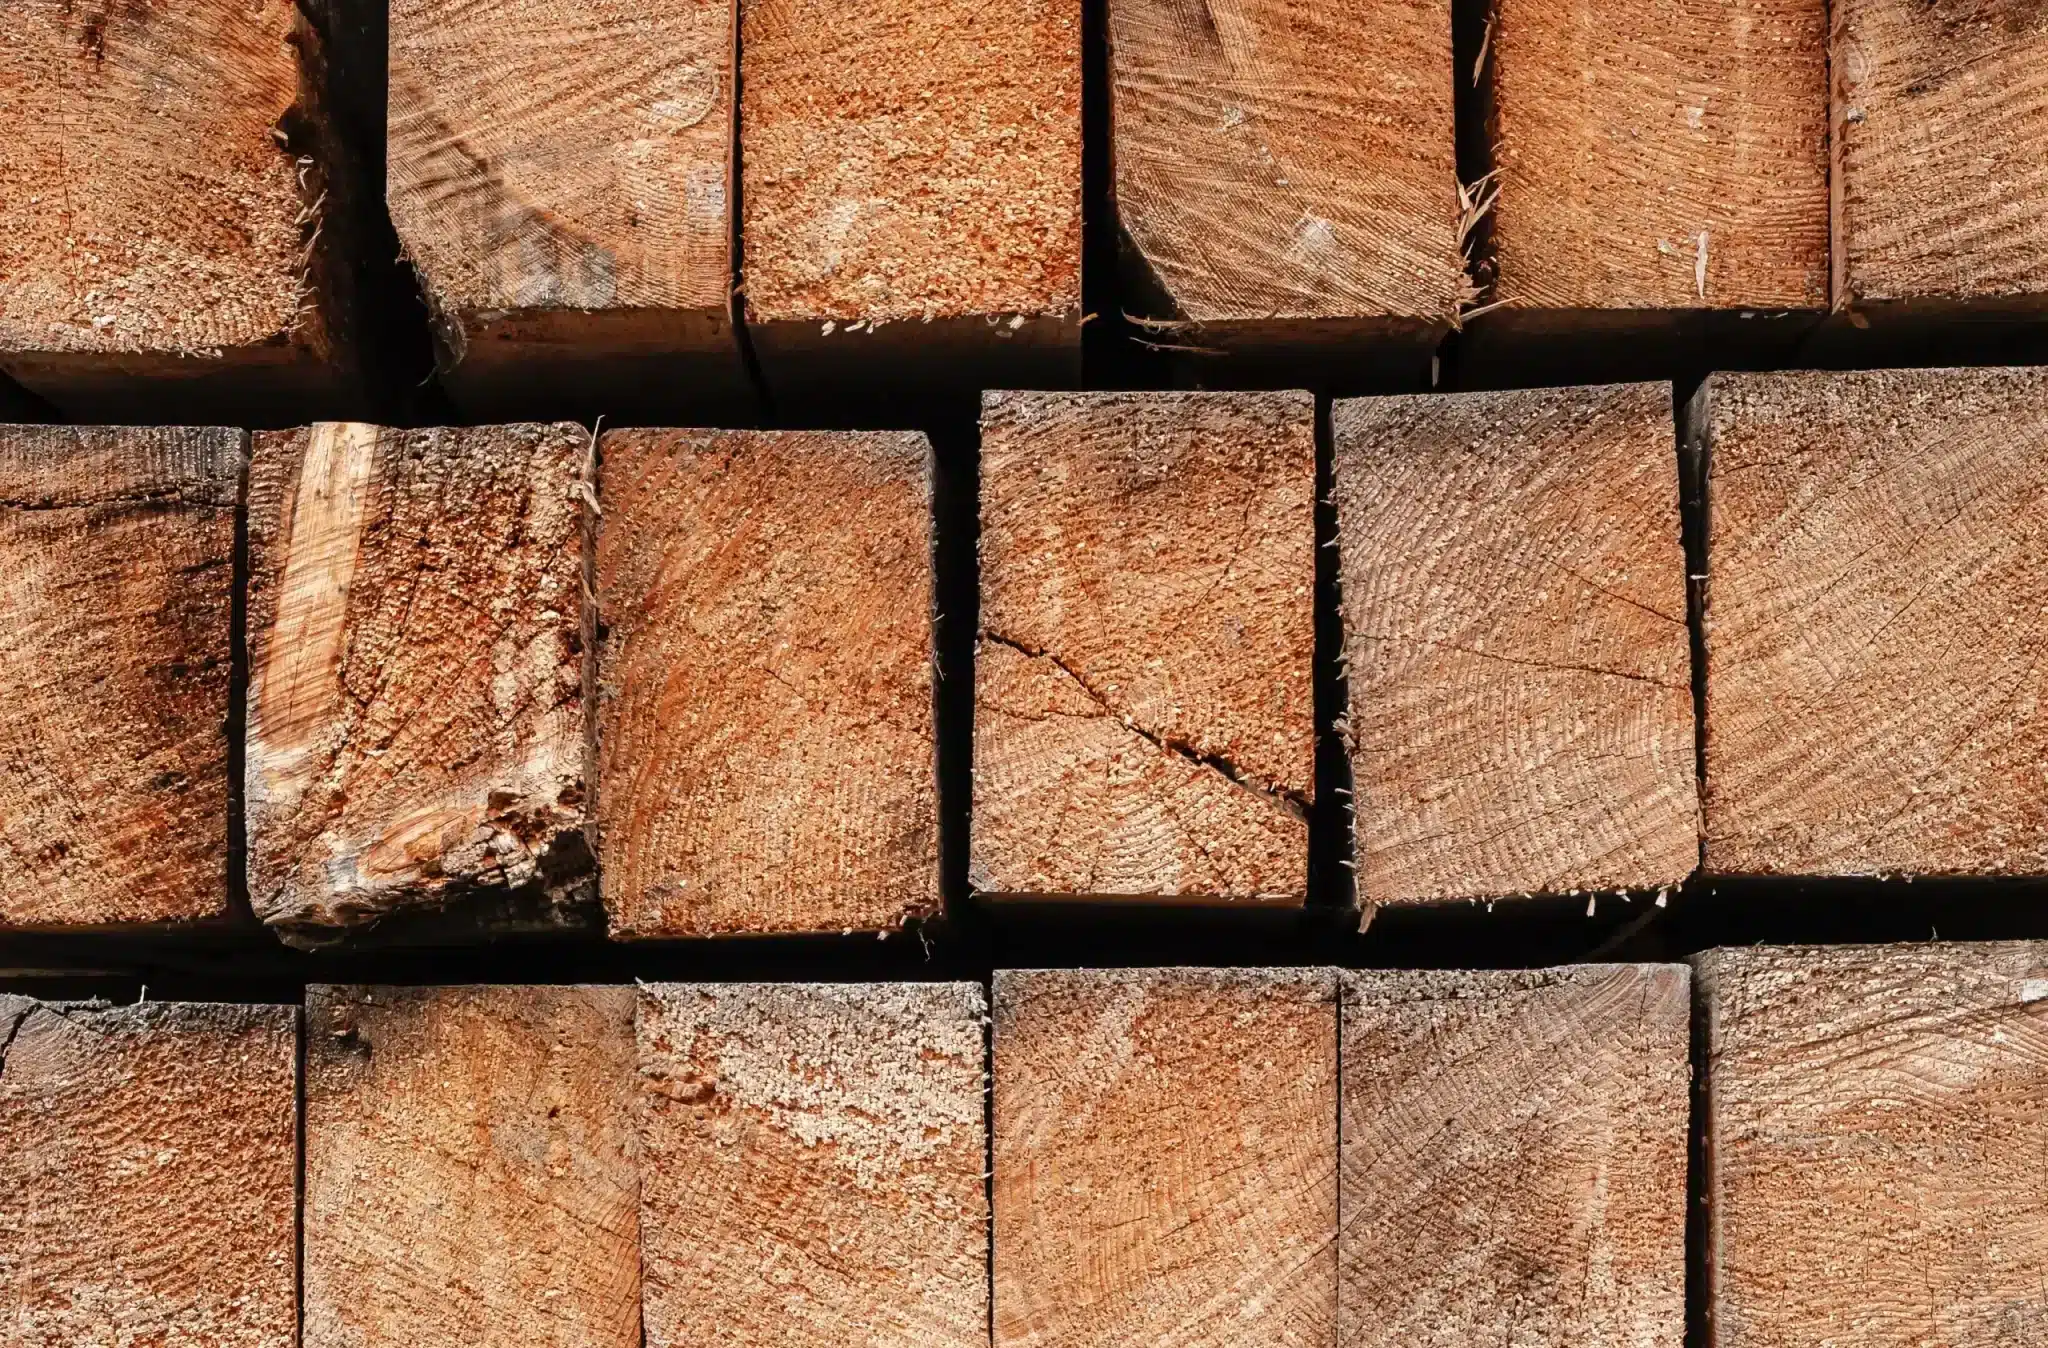 The end-grain of a stack of freshly cut lumber, showing the natural patterns and rings of the wood. The warm brown tones and textures are highlighted by sunlight, indicating the material's readiness for use in construction or carpentry.